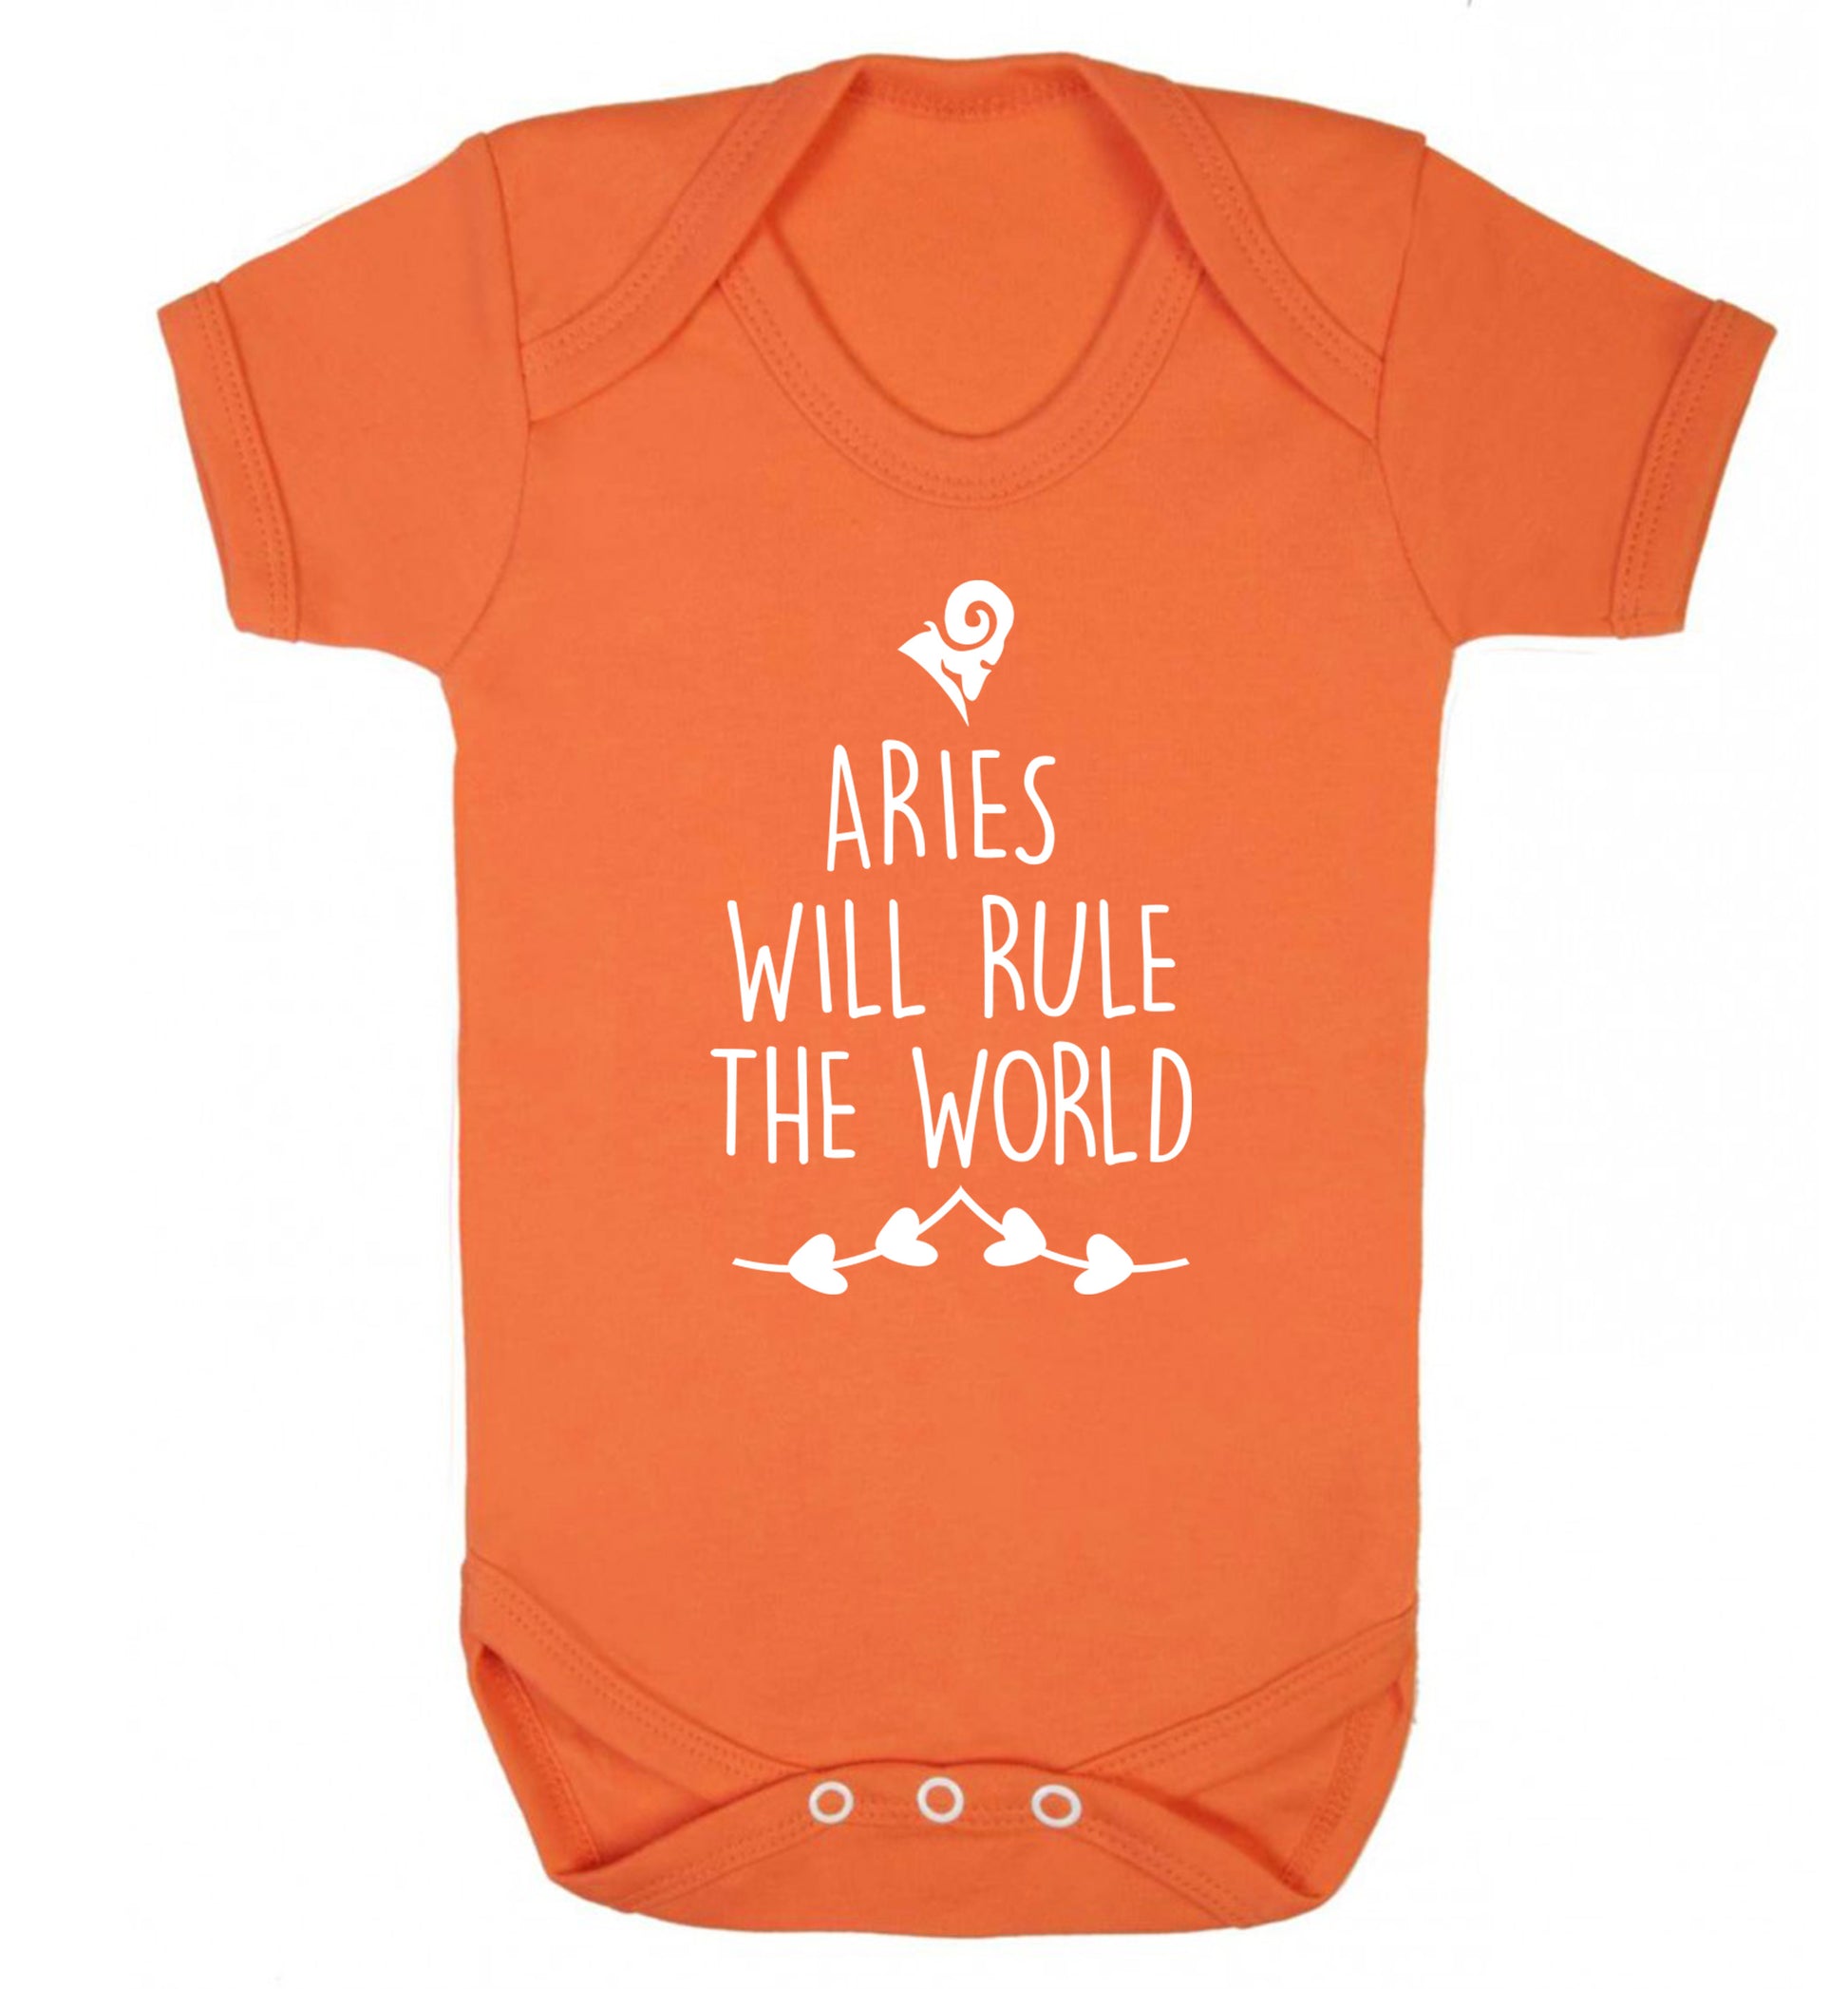 Aries will rule the world Baby Vest orange 18-24 months